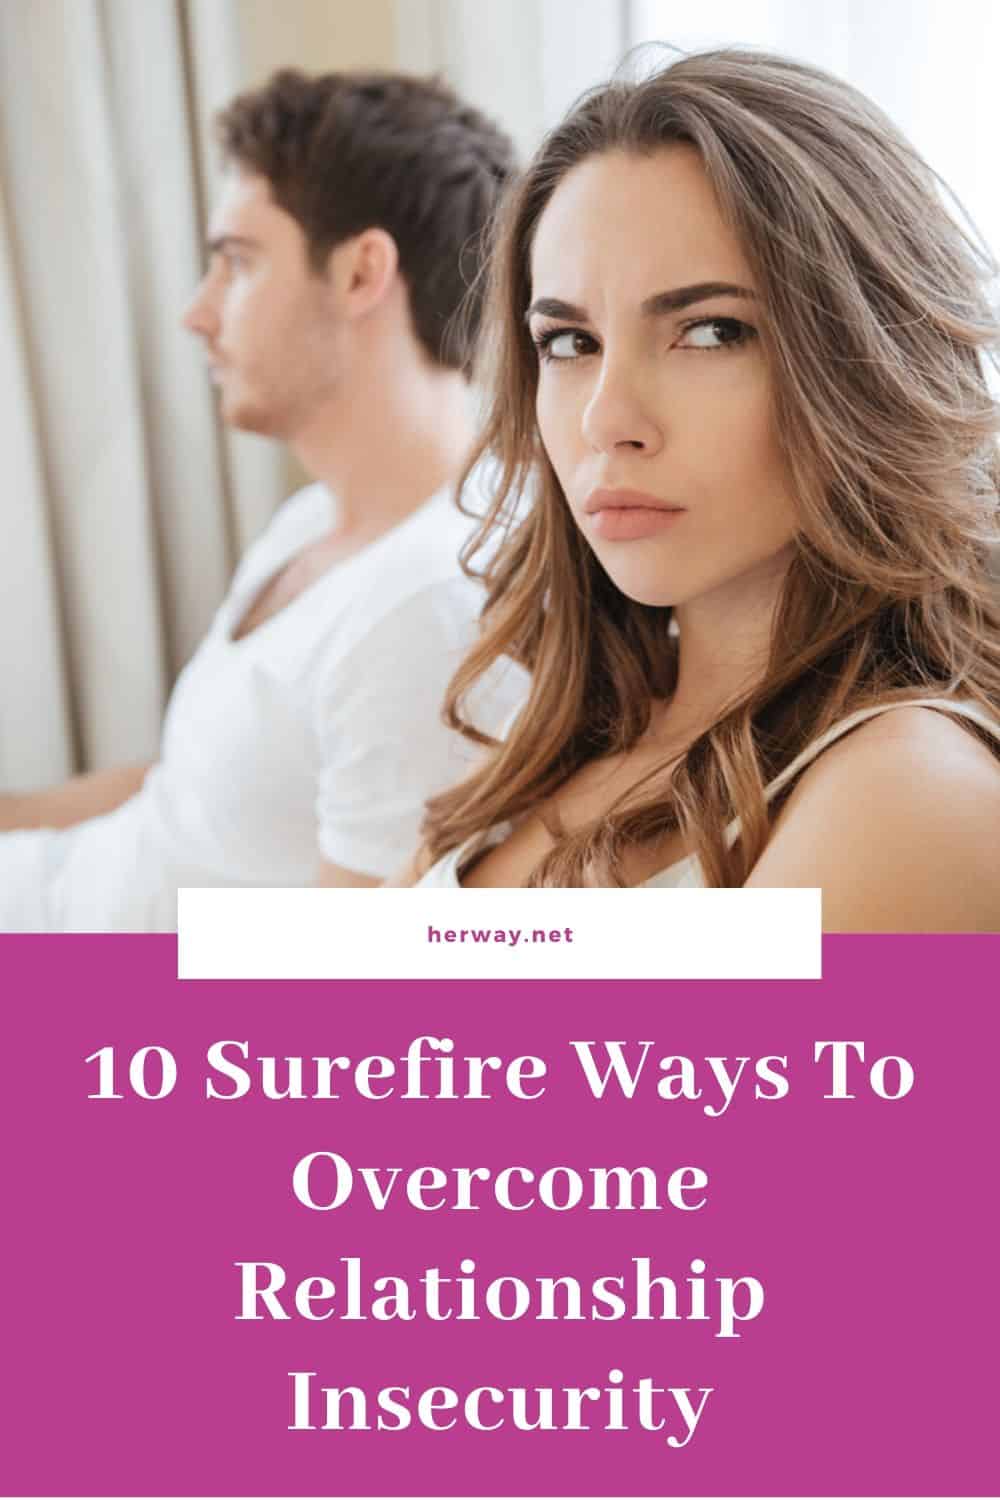 10 Surefire Ways To Overcome Relationship Insecurity